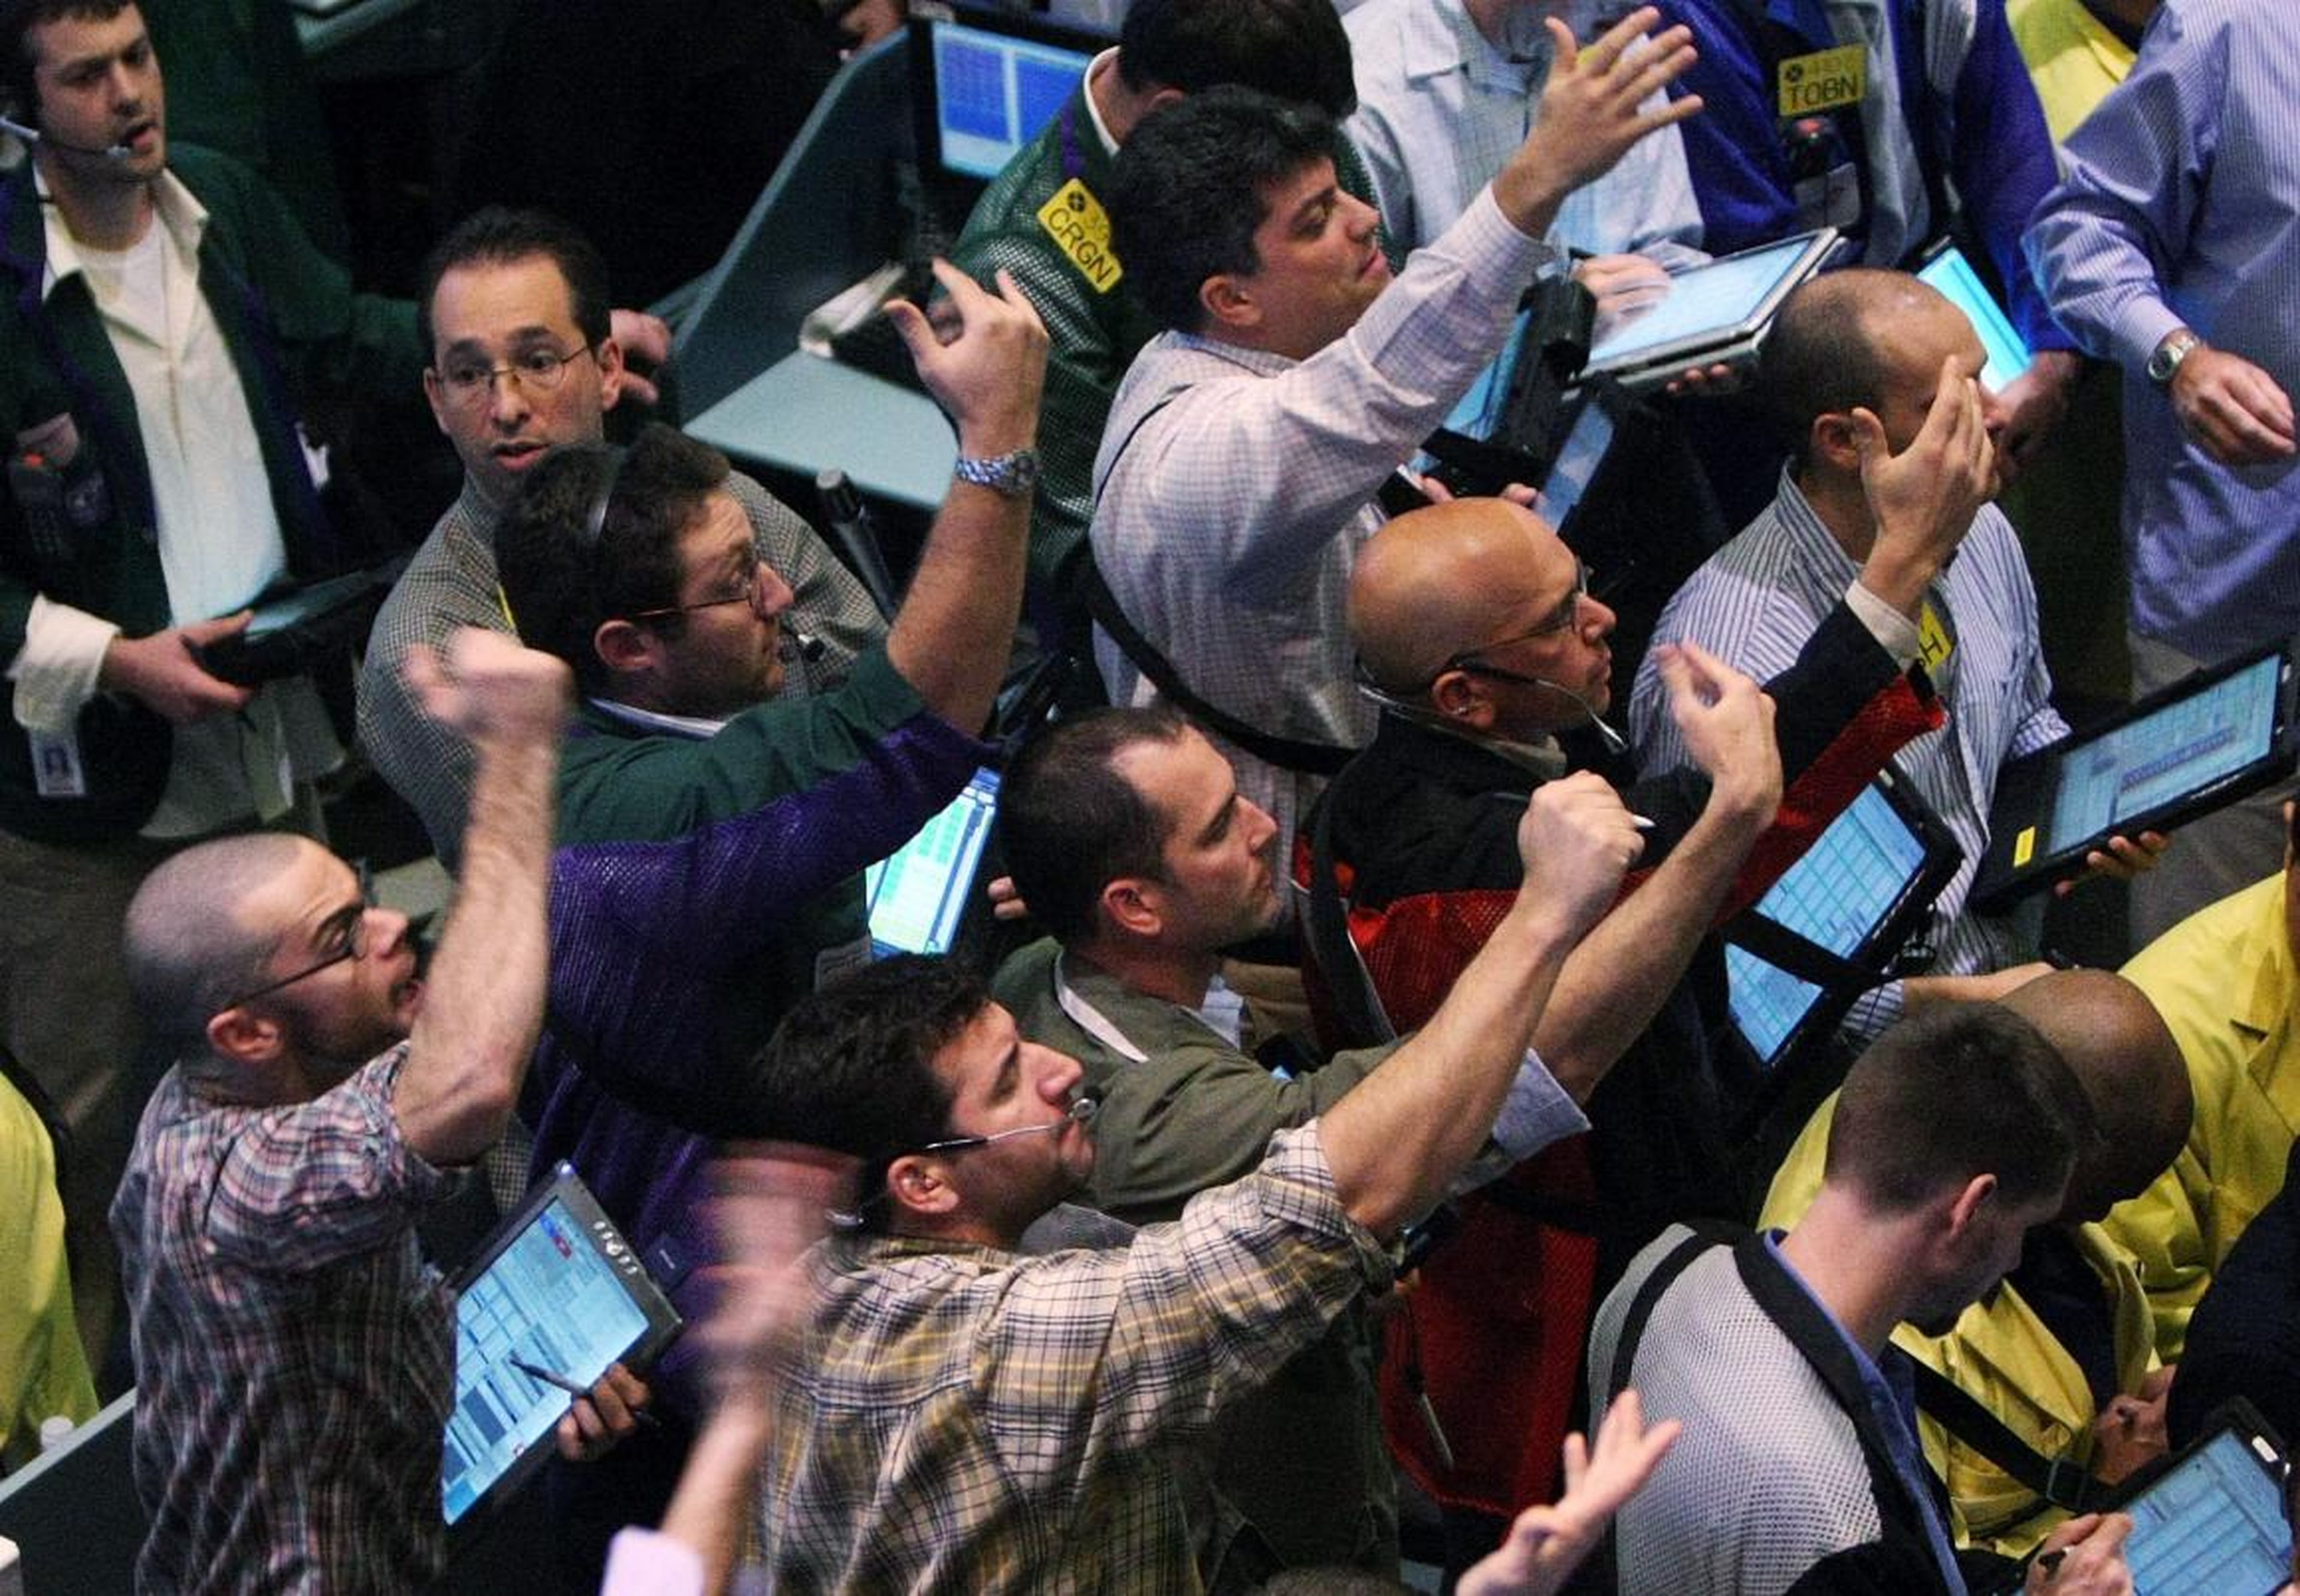 Traders work in the crude oil options pit of the New York Mercantile Exchange November 1, 2007 in New York City. Oil prices approached record highs again today after a surprise drop in stockpiles of U.S. crude ahead of winter demand.